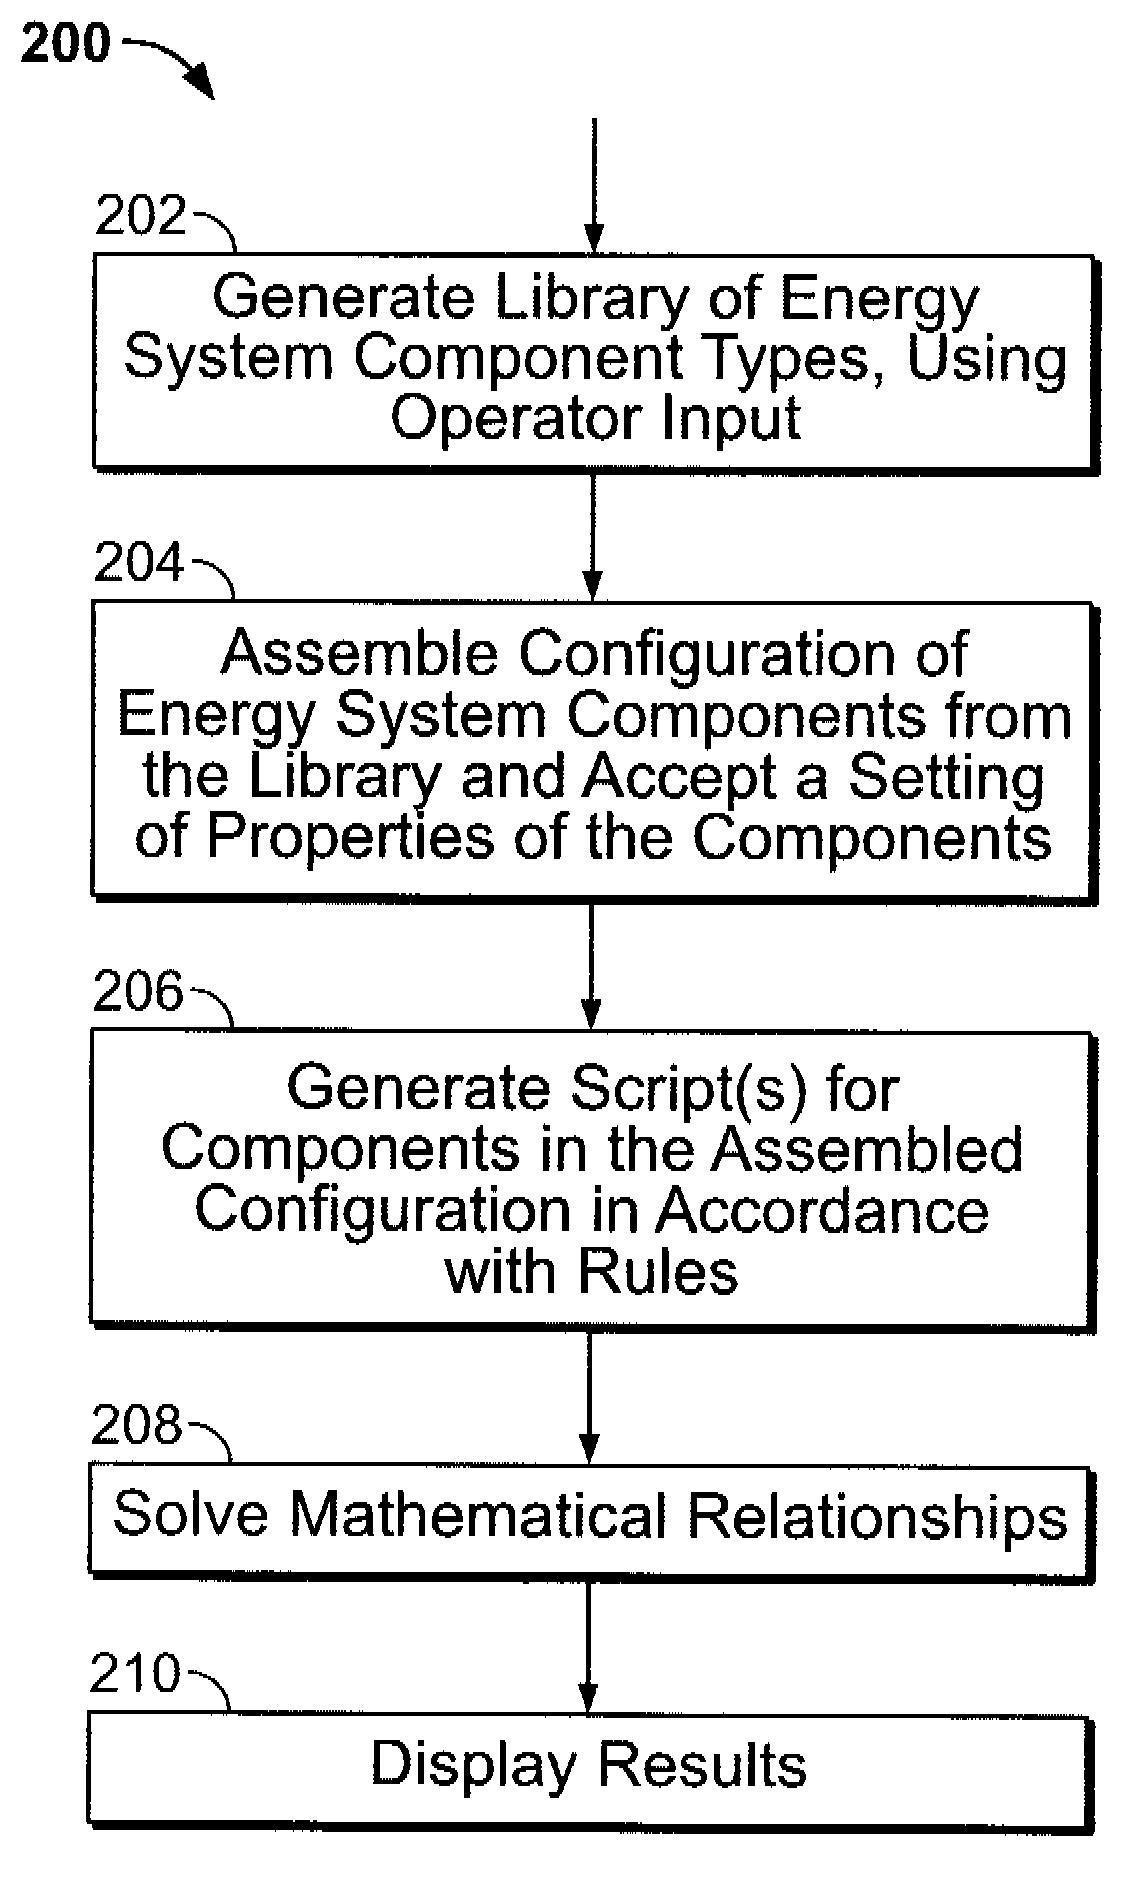 Energy system modeling apparatus and methods